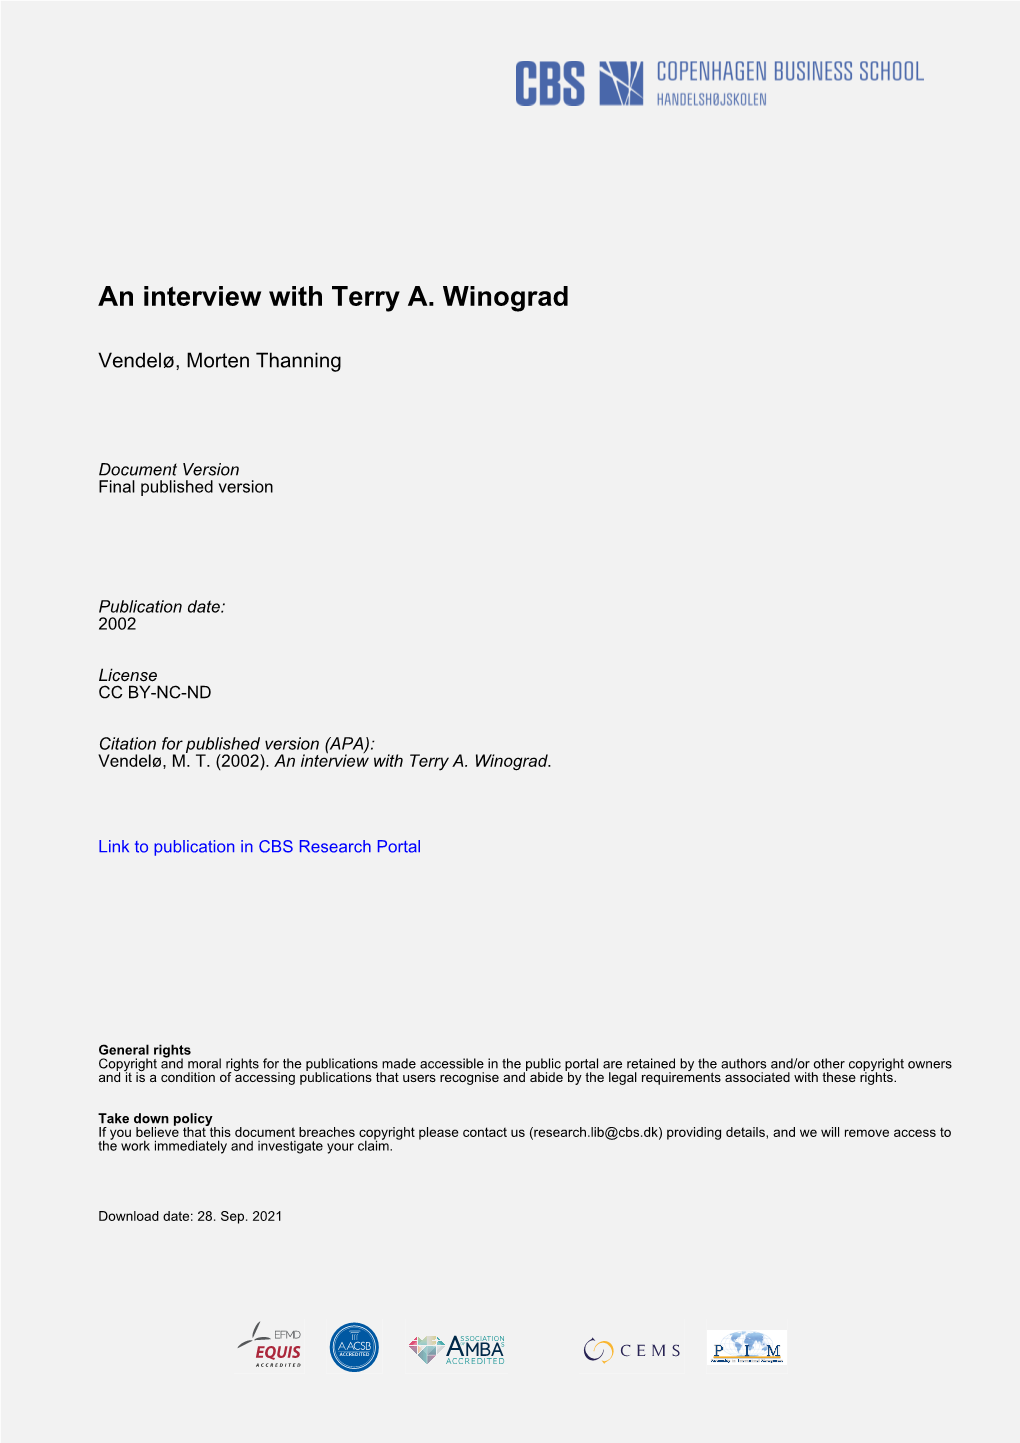 Interview with Terry Winograd, February 29